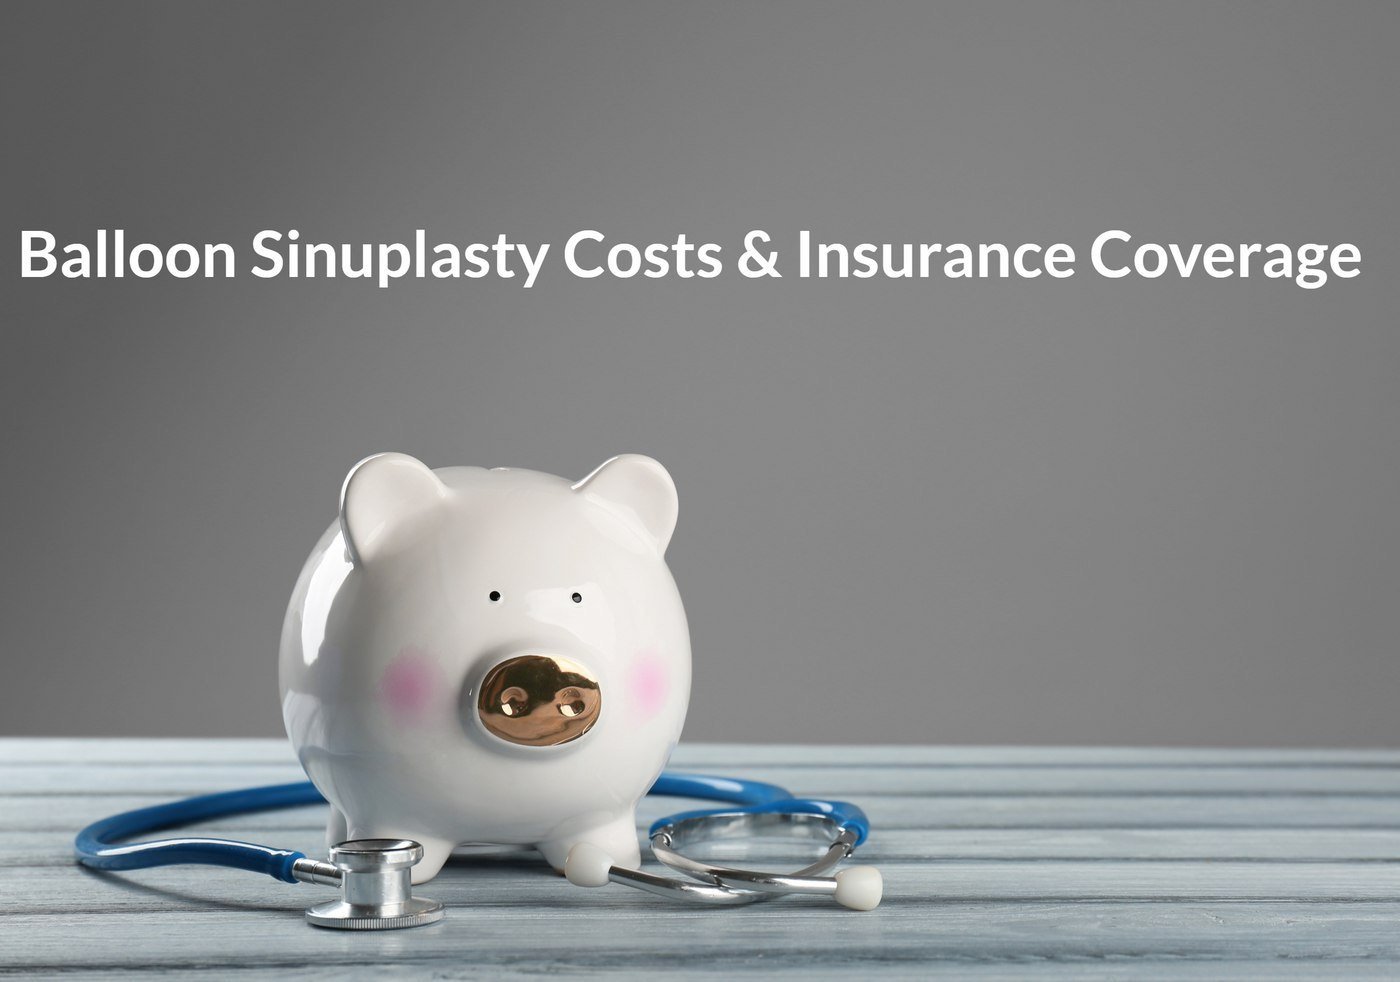 Balloon Sinuplasty Costs and insurance coverage in Houston Texas